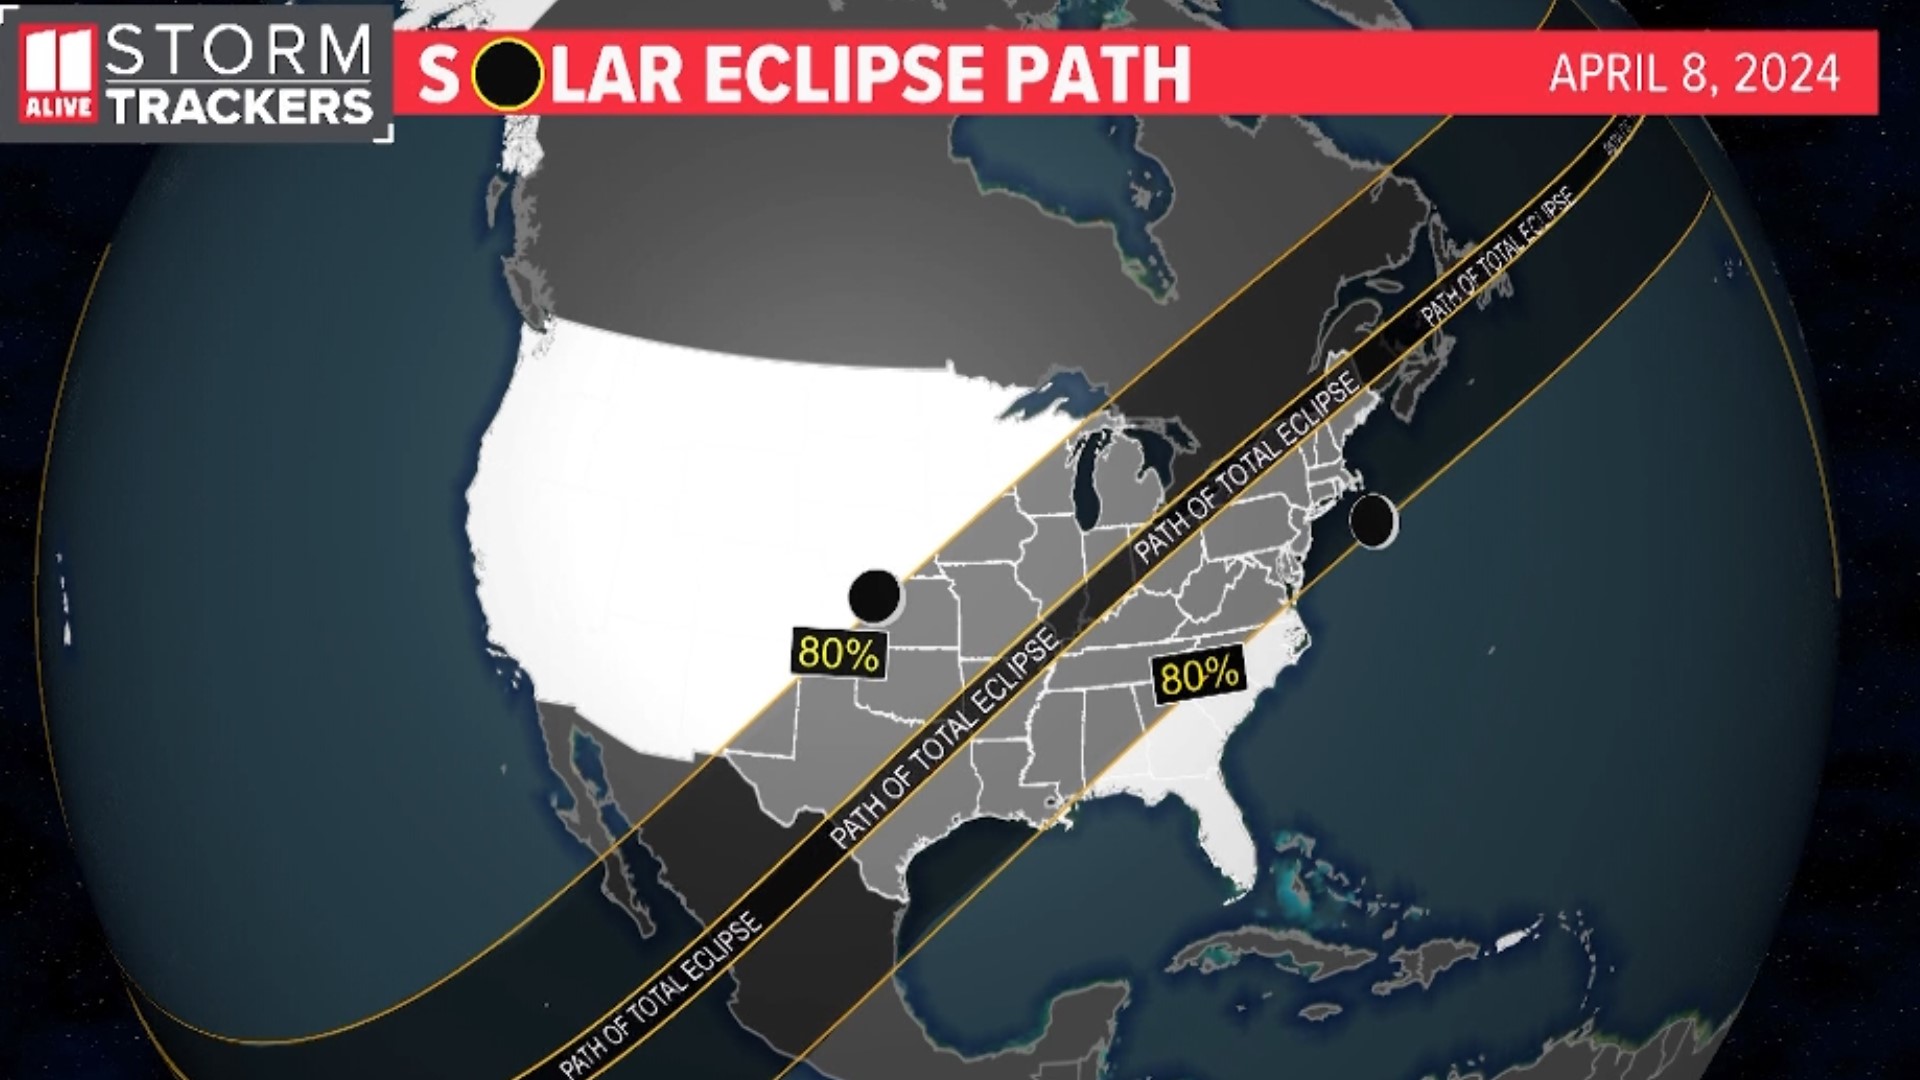 While Georgia misses out on the path of totality, you’ll still be able to see a partial eclipse.